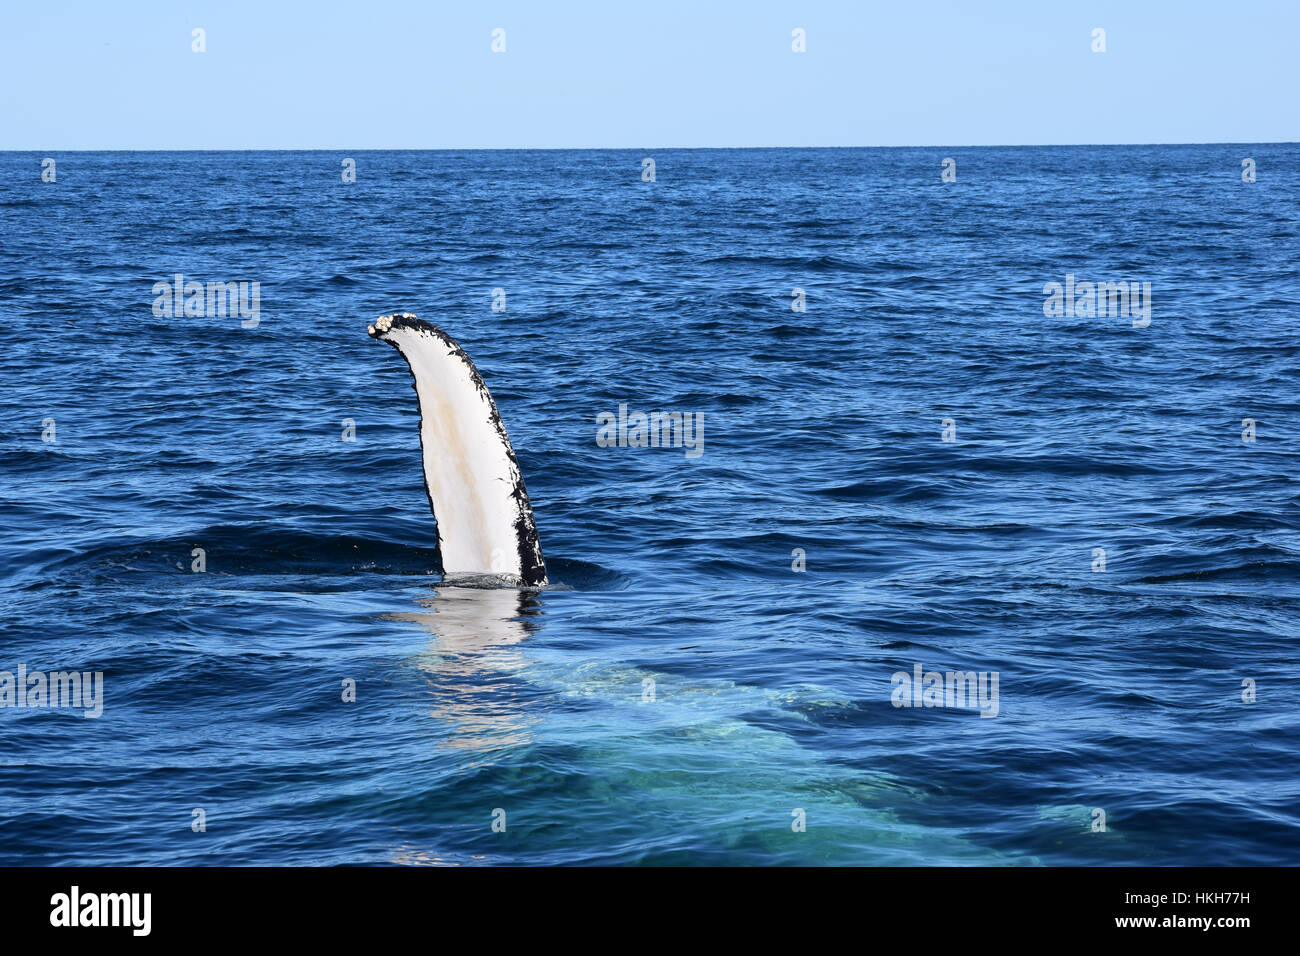 A humpback whale gives a flipper wave. Stock Photo